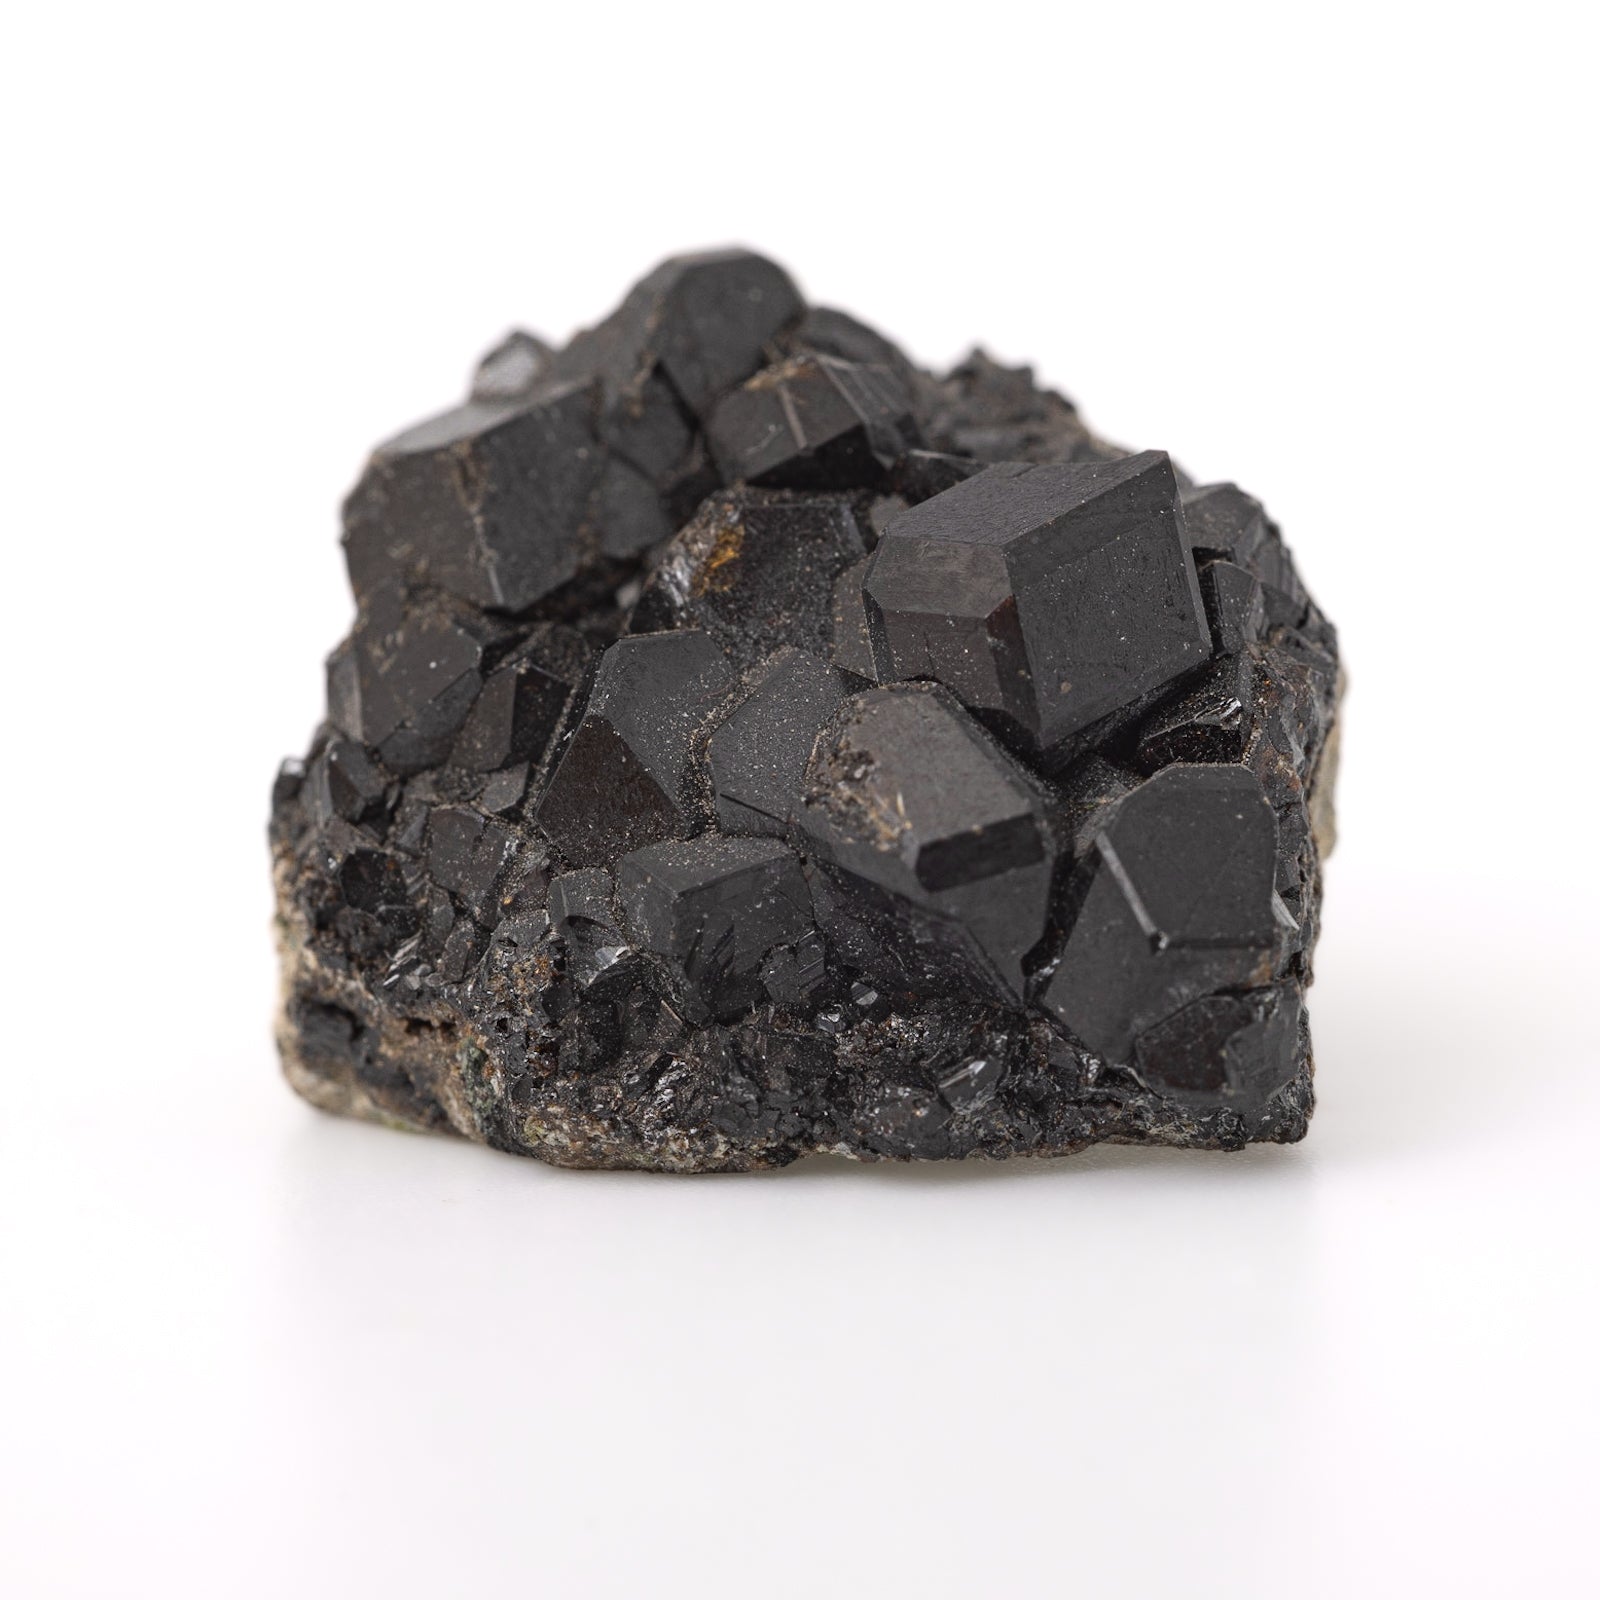 Black Garnet clusters, approximately 1 inch in size, handpicked for you by Juniper Stones.